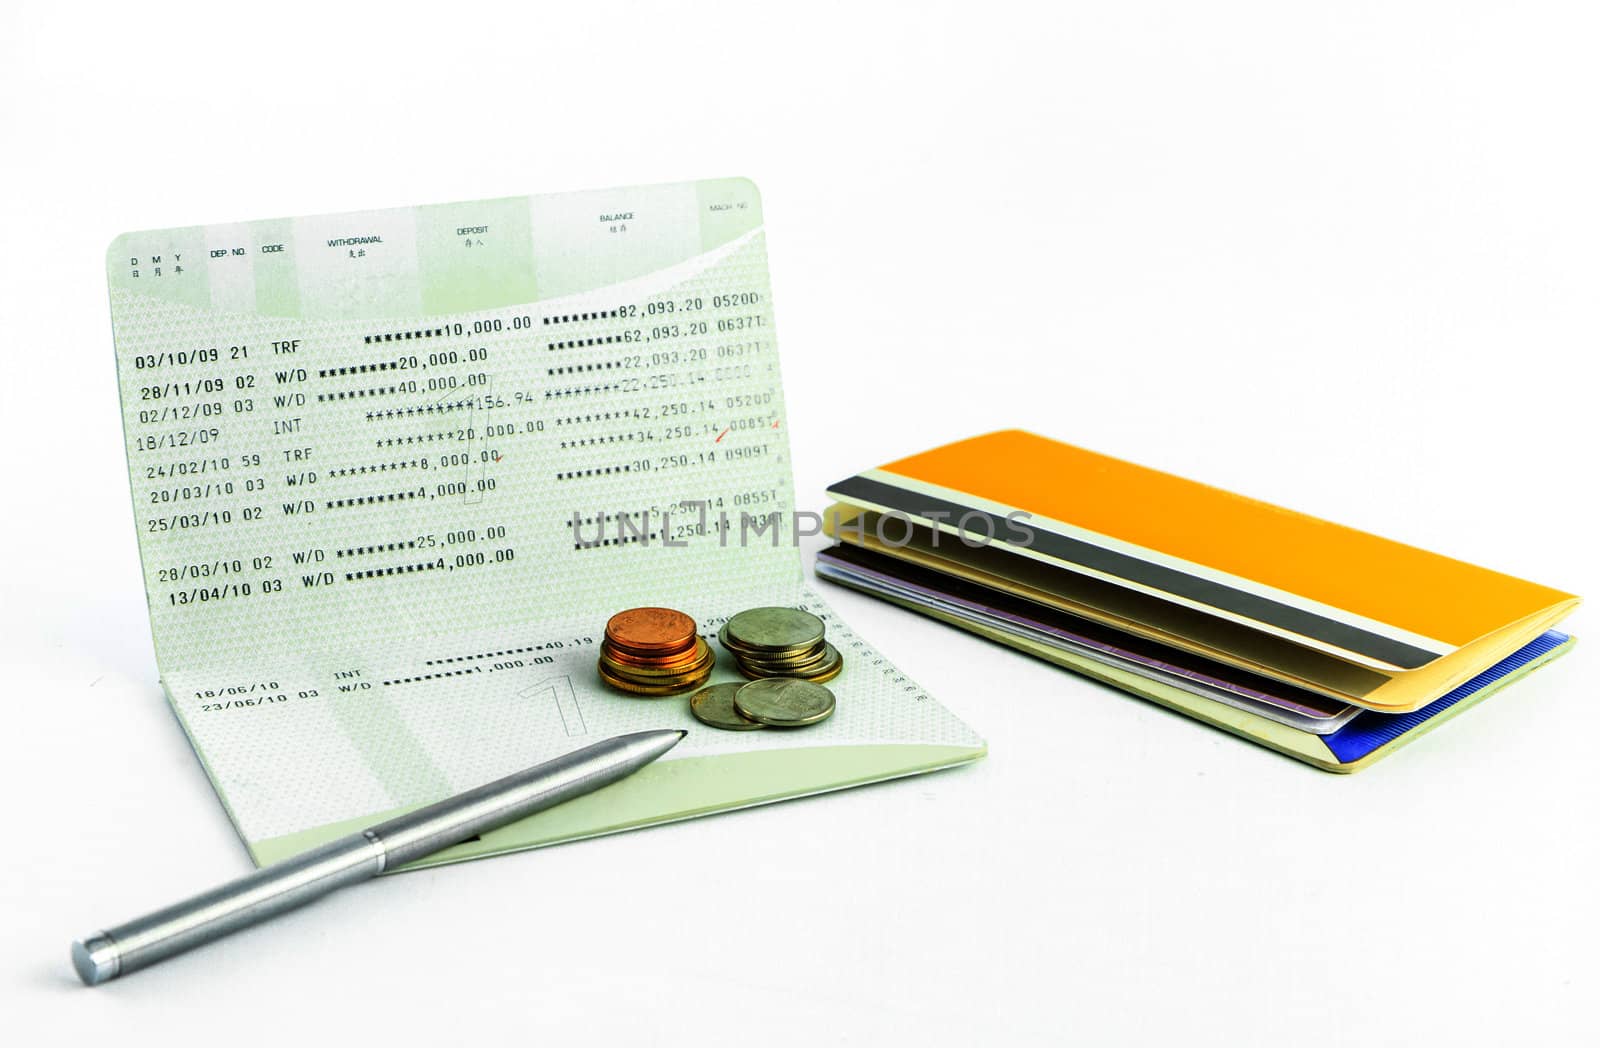 Coins and pen on account passbook isolate on white background